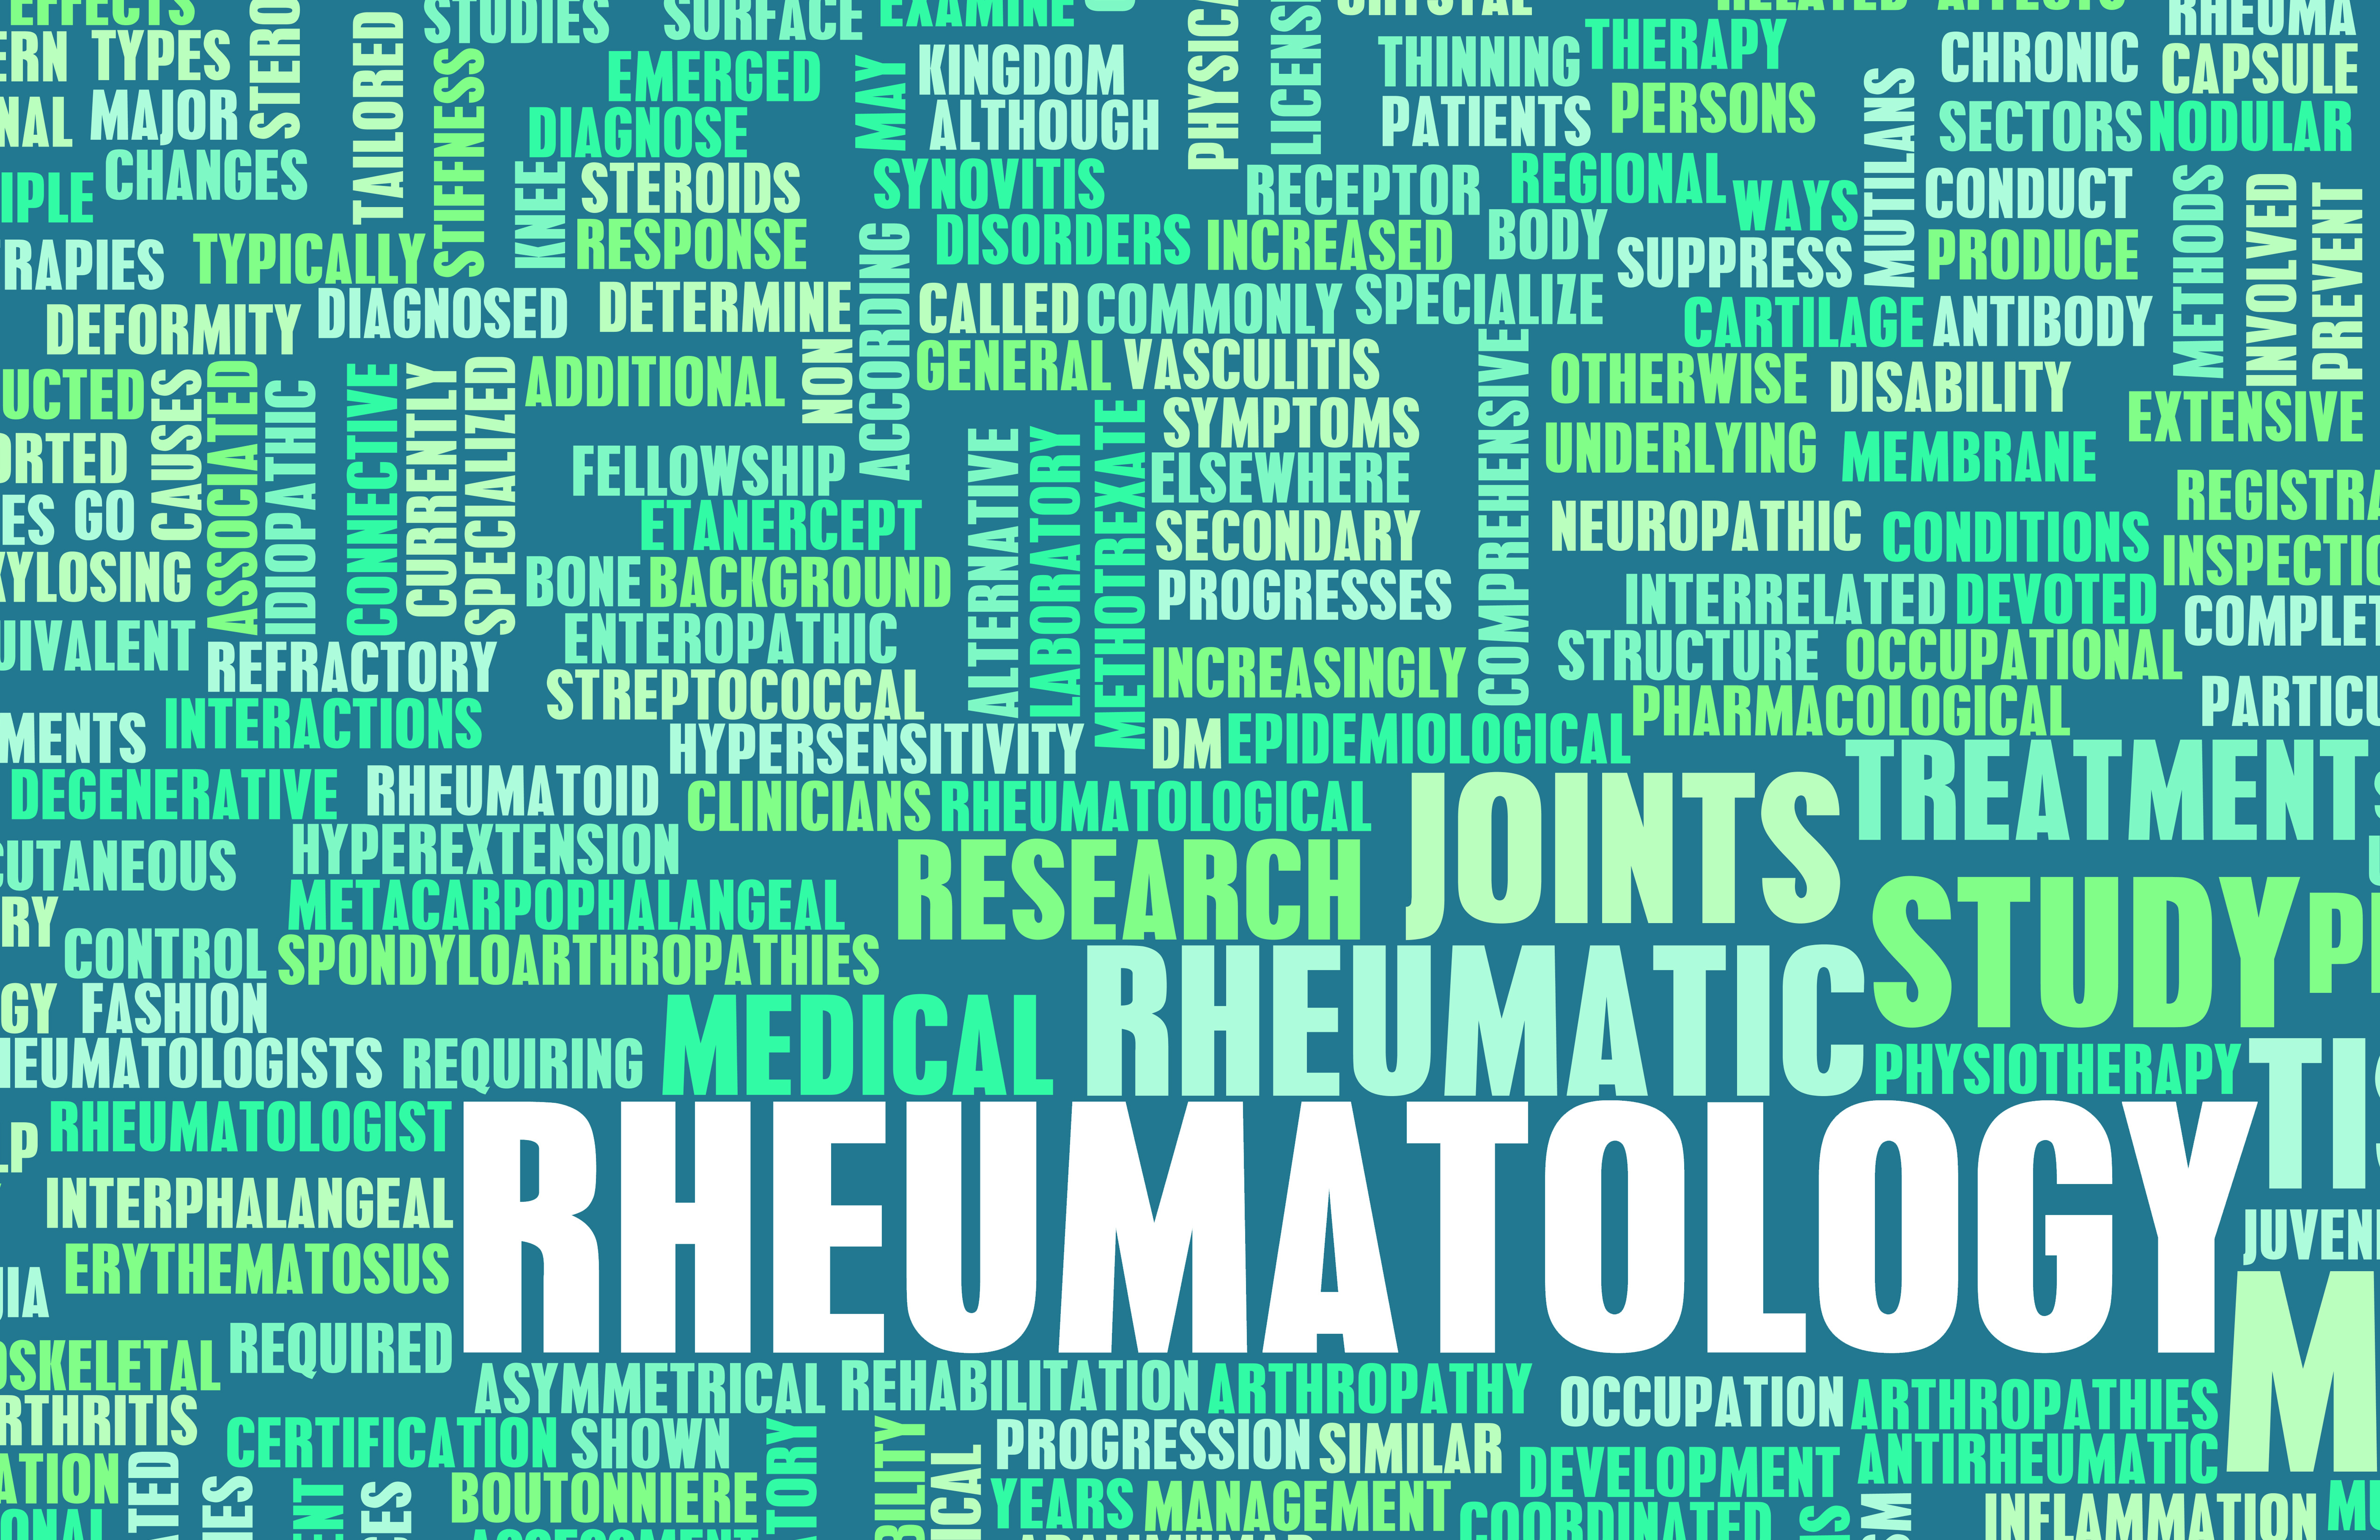 Referral to a Rheumatologist Specialist